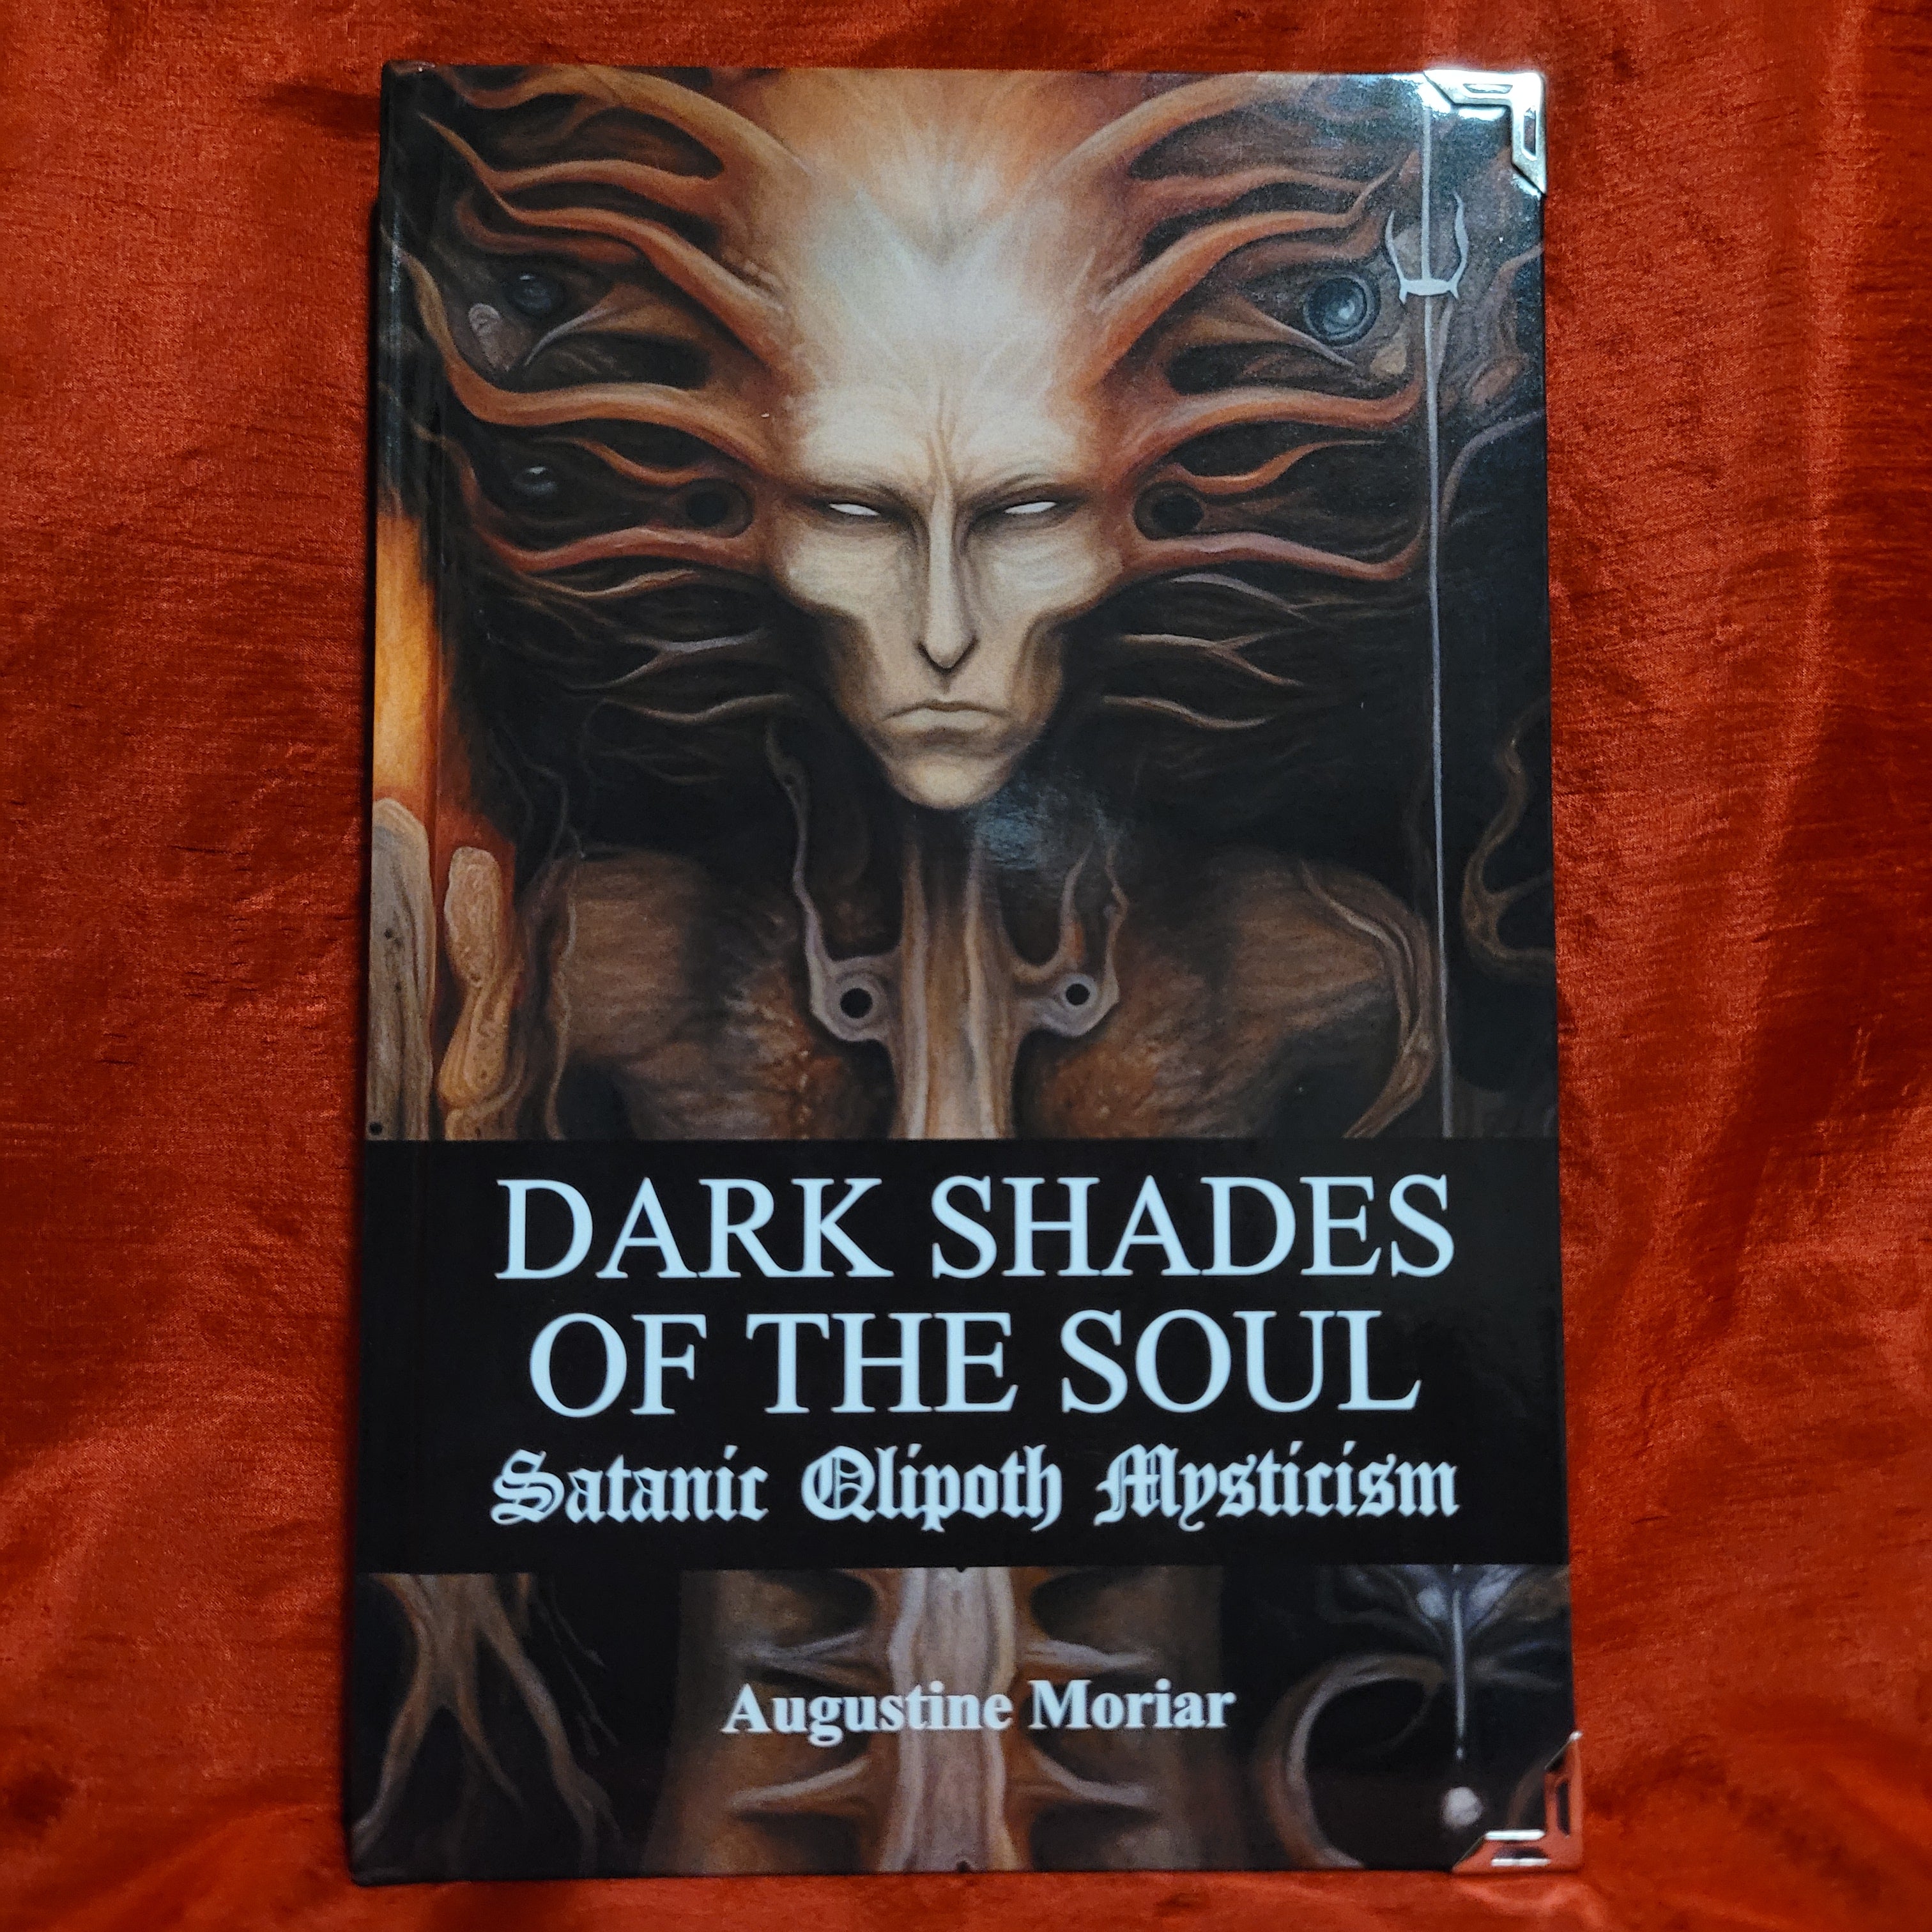 Dark Shades of the Soul: Satanic Qliphoth Mysticism by Augustine Moriar  (Thanatos Publishing/Sirius Limited Esoterica